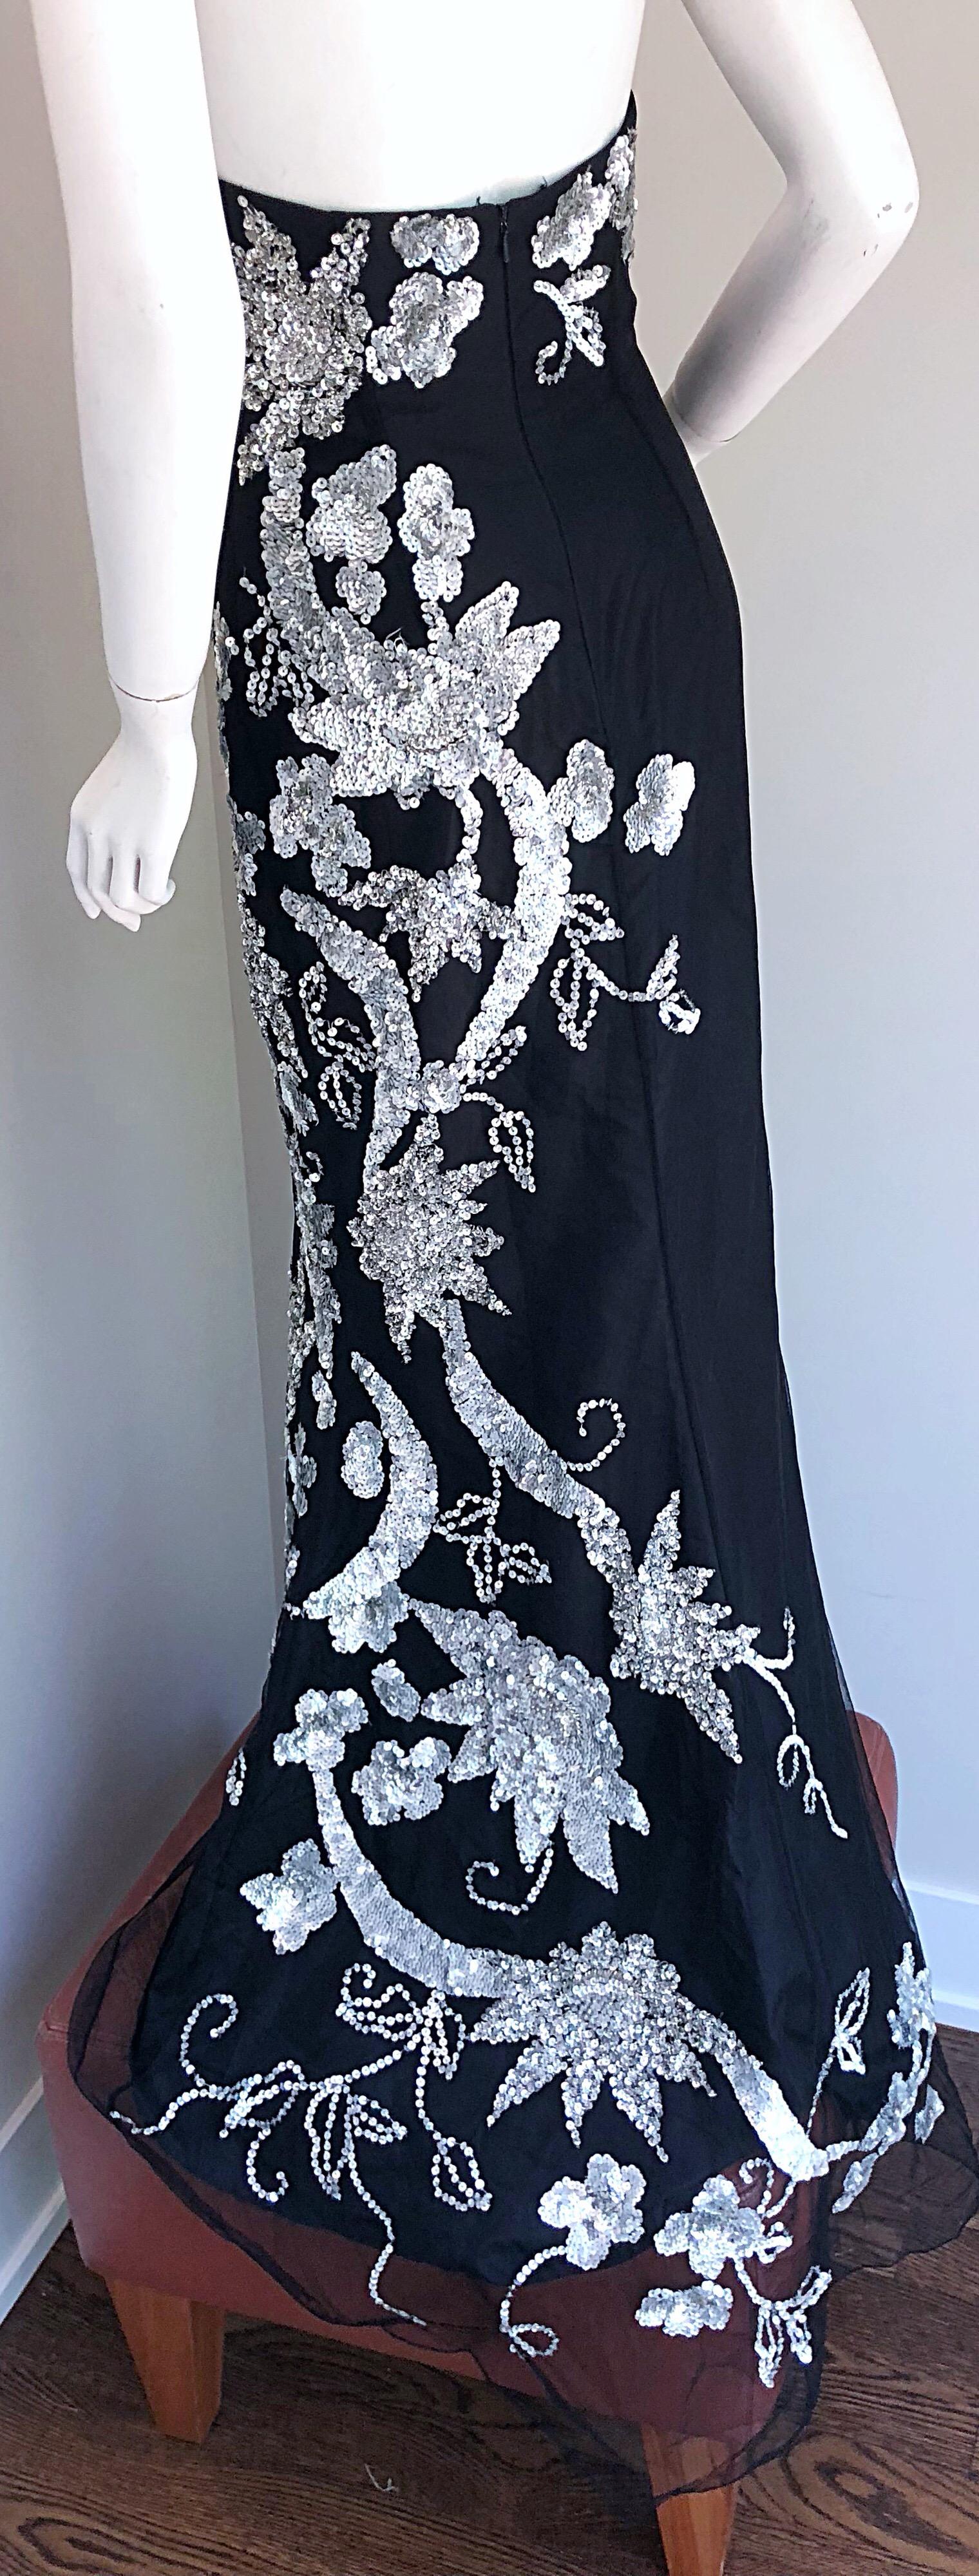 Gorgeous 1990s Black and Silver Sequined Dramatic Strapless Vintage 90s Gown  4